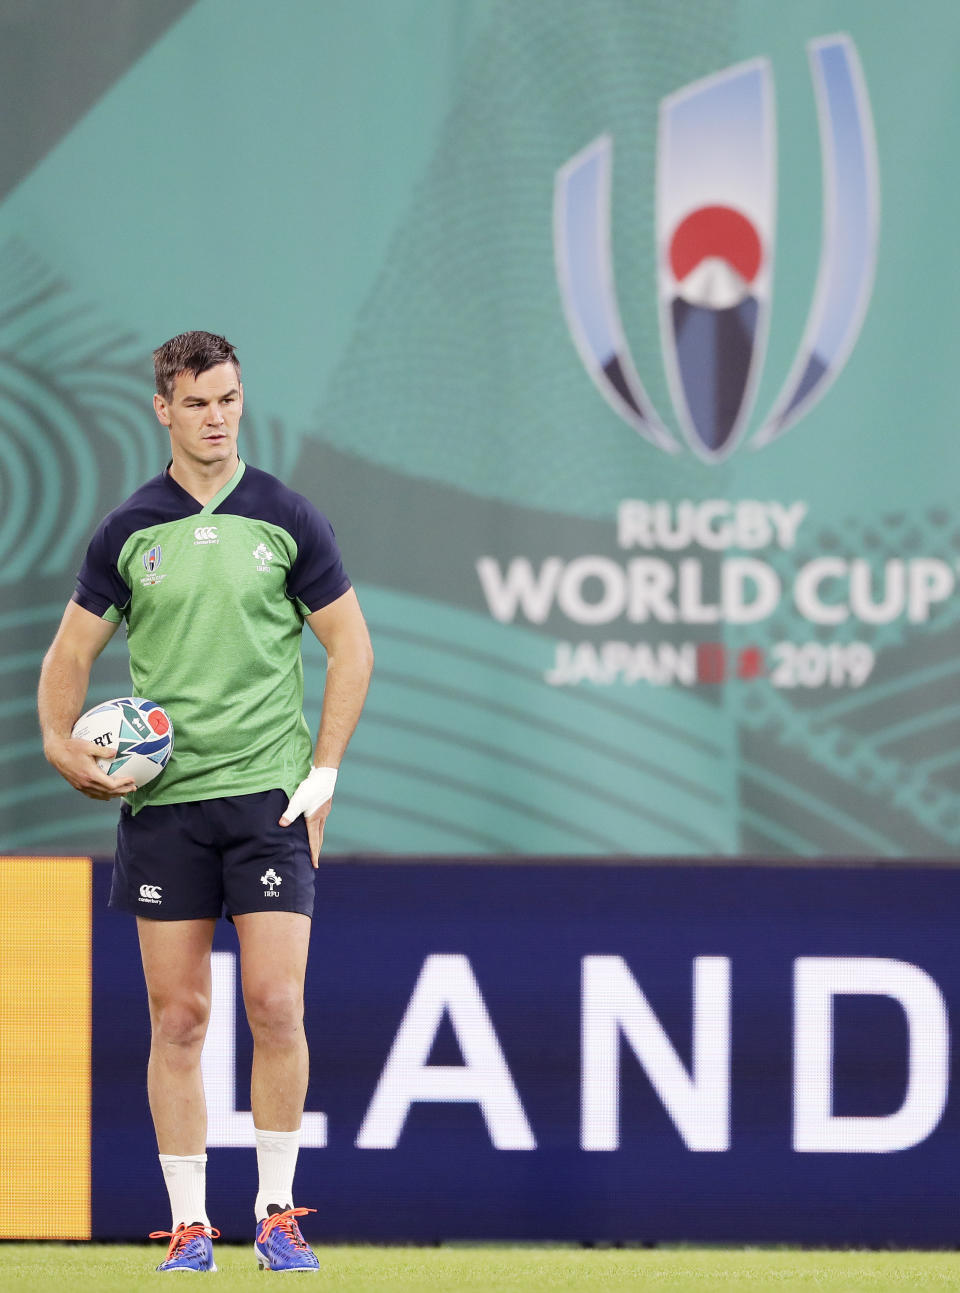 Ireland's Jonathan Sexton pauses during a training session at the Rugby World Cup in Kobe, western Japan, Wednesday, Oct. 2, 2019. (Yohei Fukuyama/Kyodo News via AP)